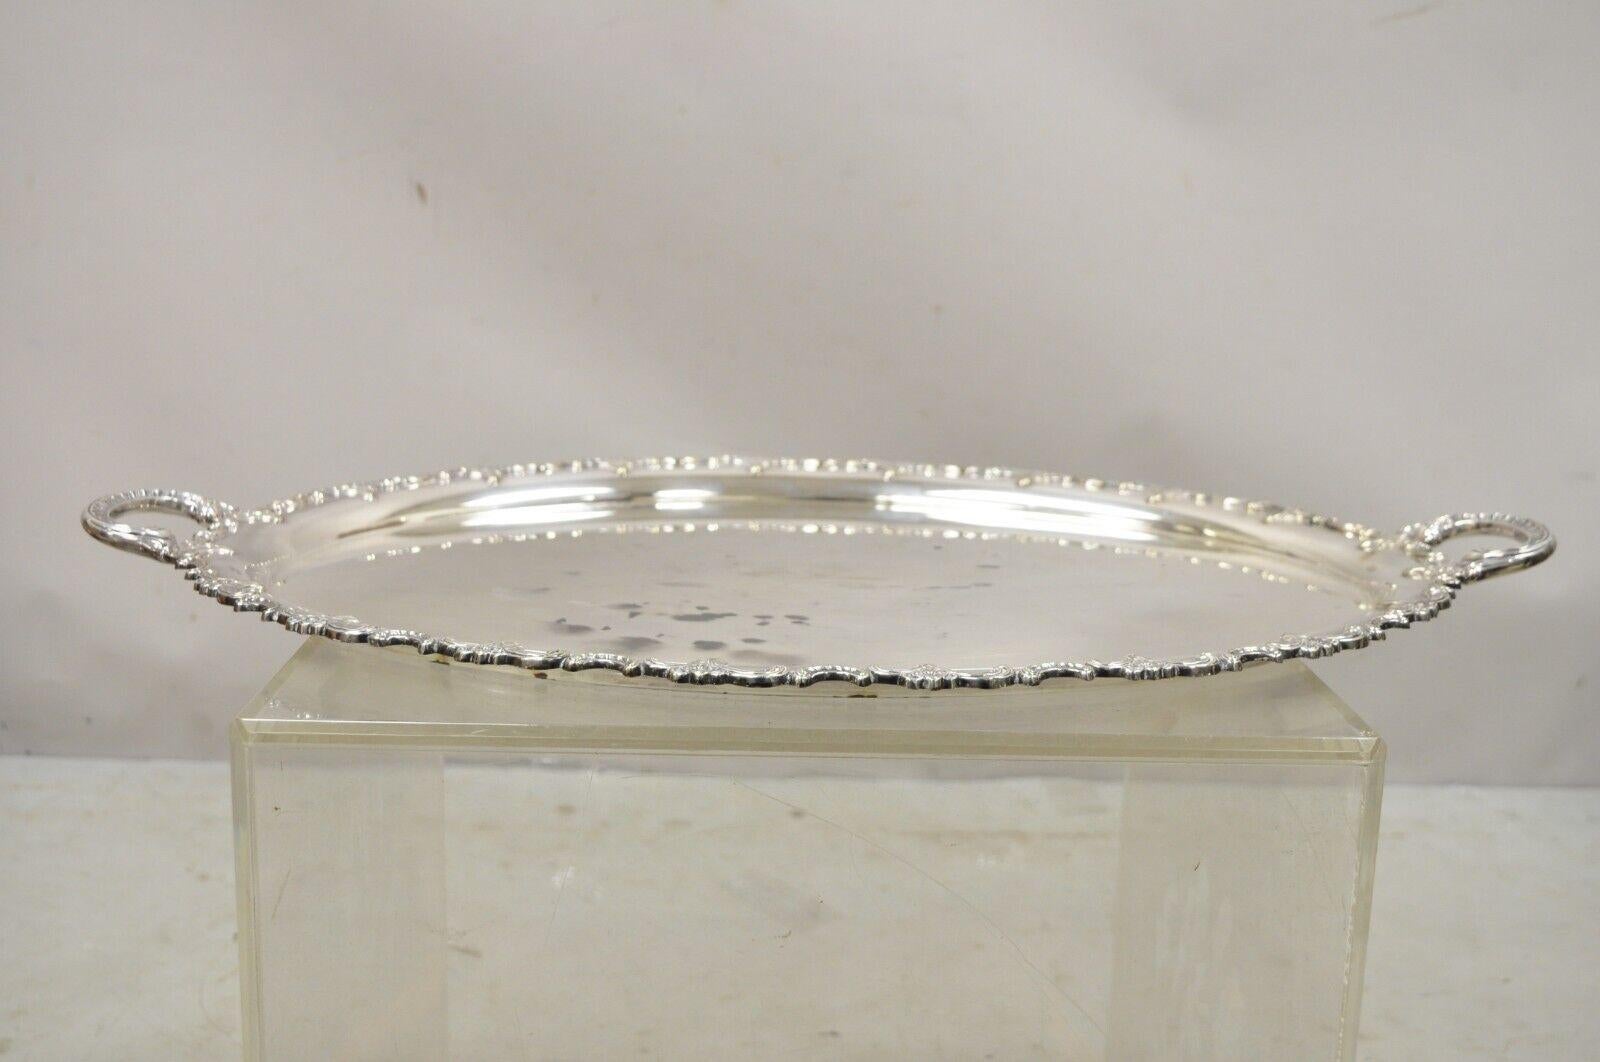 Vintage Handarbelt Alpacca silver plate oval tray serving platter. Item features ornate twin handles, decorated rim, oval form, original stamp, very nice vintage item, circa Age: Early 20th century. Measurements: 1.5